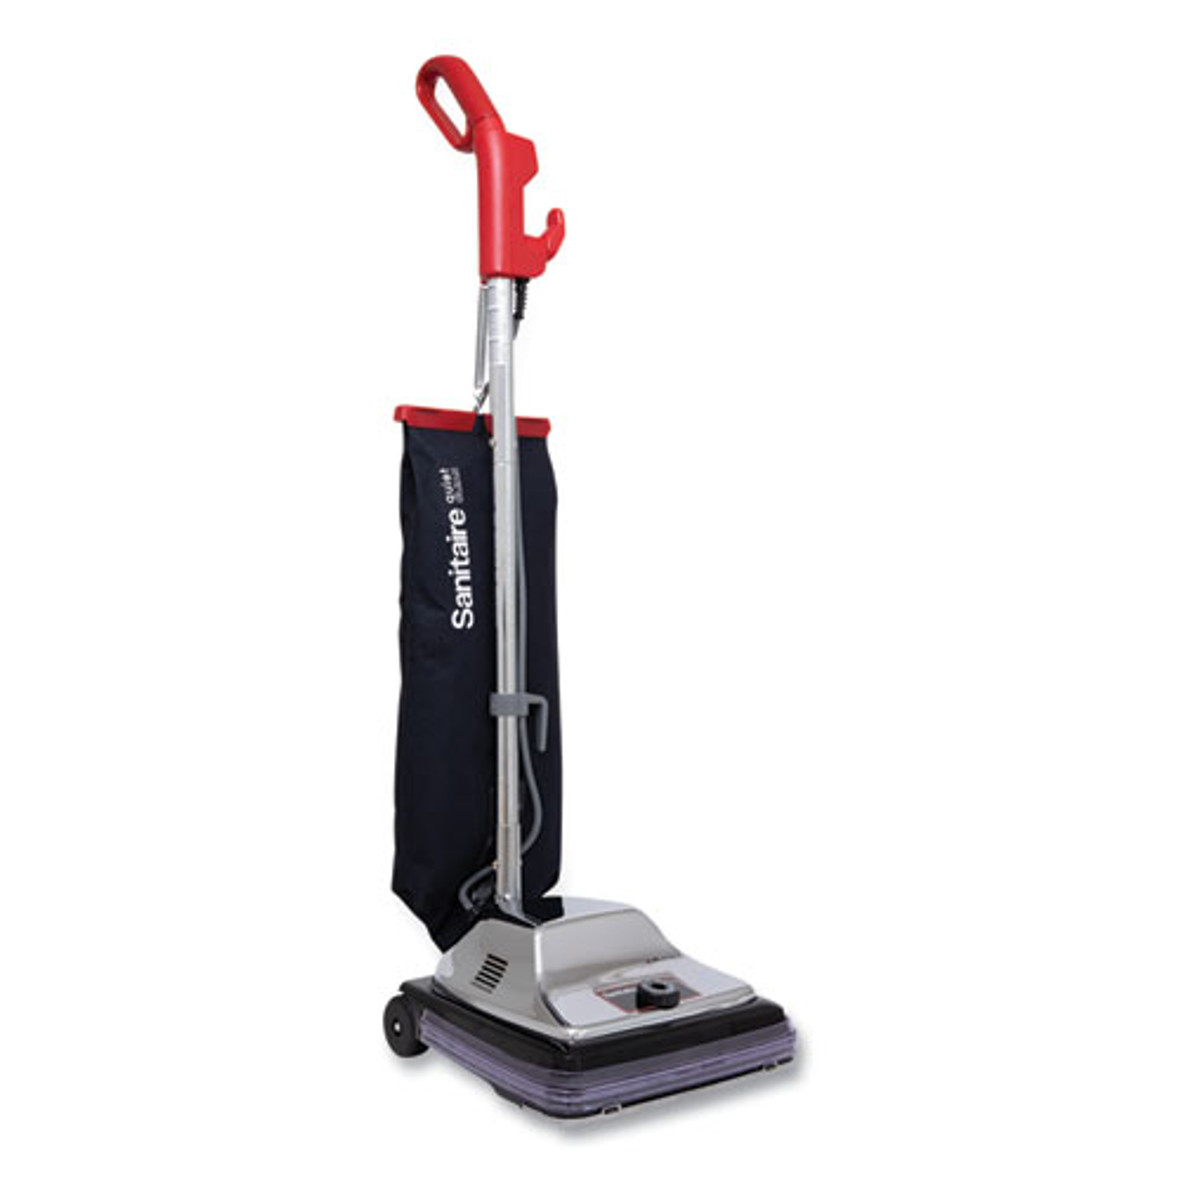 Sanitaire Tradition Quietclean Upright Vacuum Sc889a, 12" Cleaning Path, Gray/Red/Black - EURSC889D